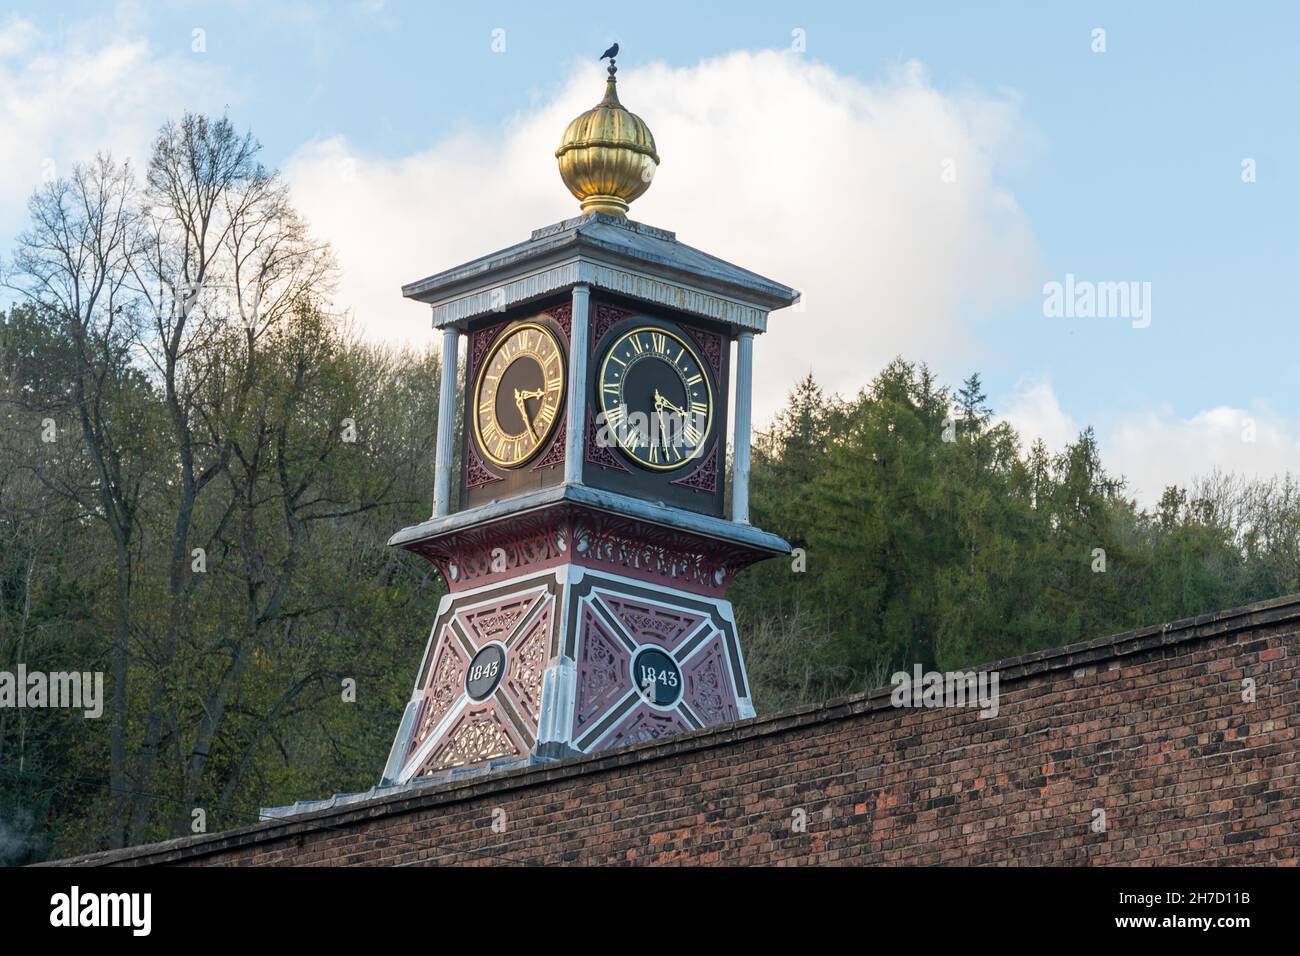 The Coalbrookdale Museum of Iron, a visitor attraction in Ironbridge Gorge, Shropshire, England, UK. Close-up view of the ornate clock tower. Stock Photo